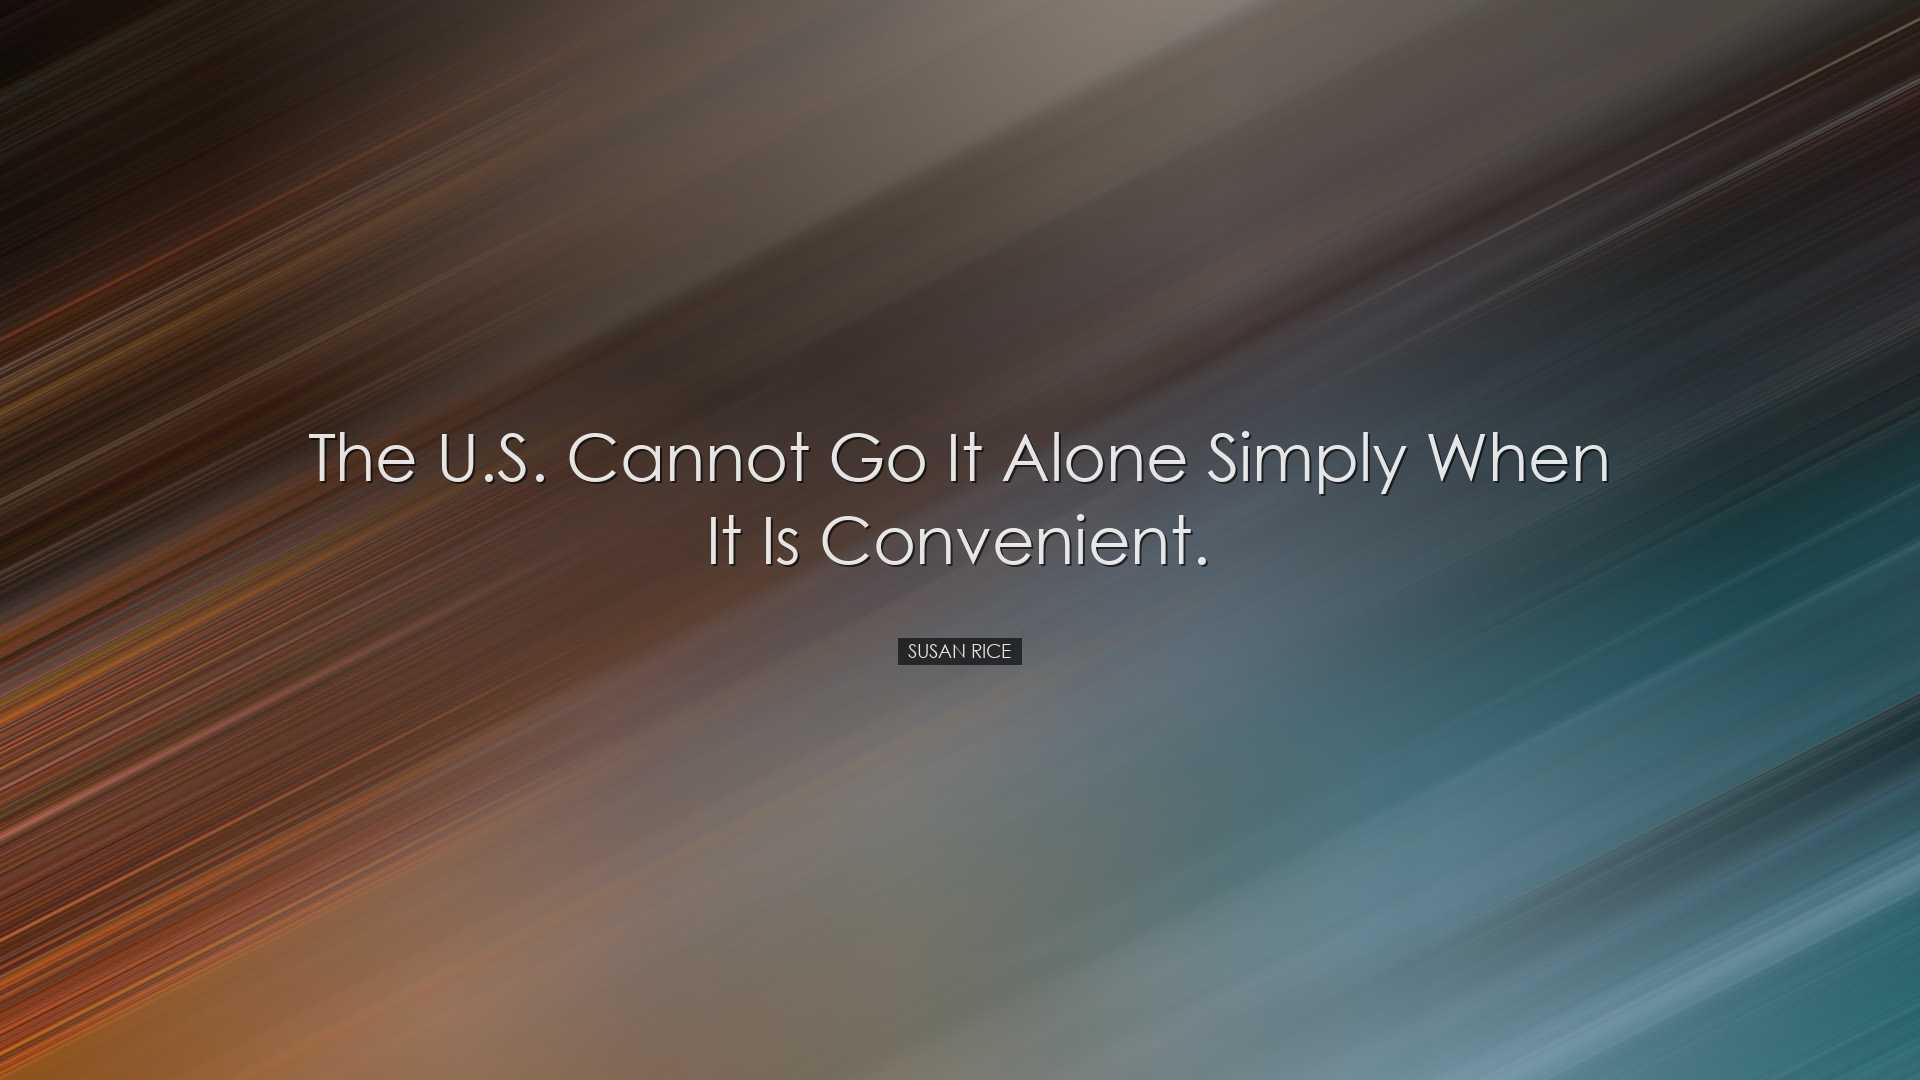 The U.S. cannot go it alone simply when it is convenient. - Susan